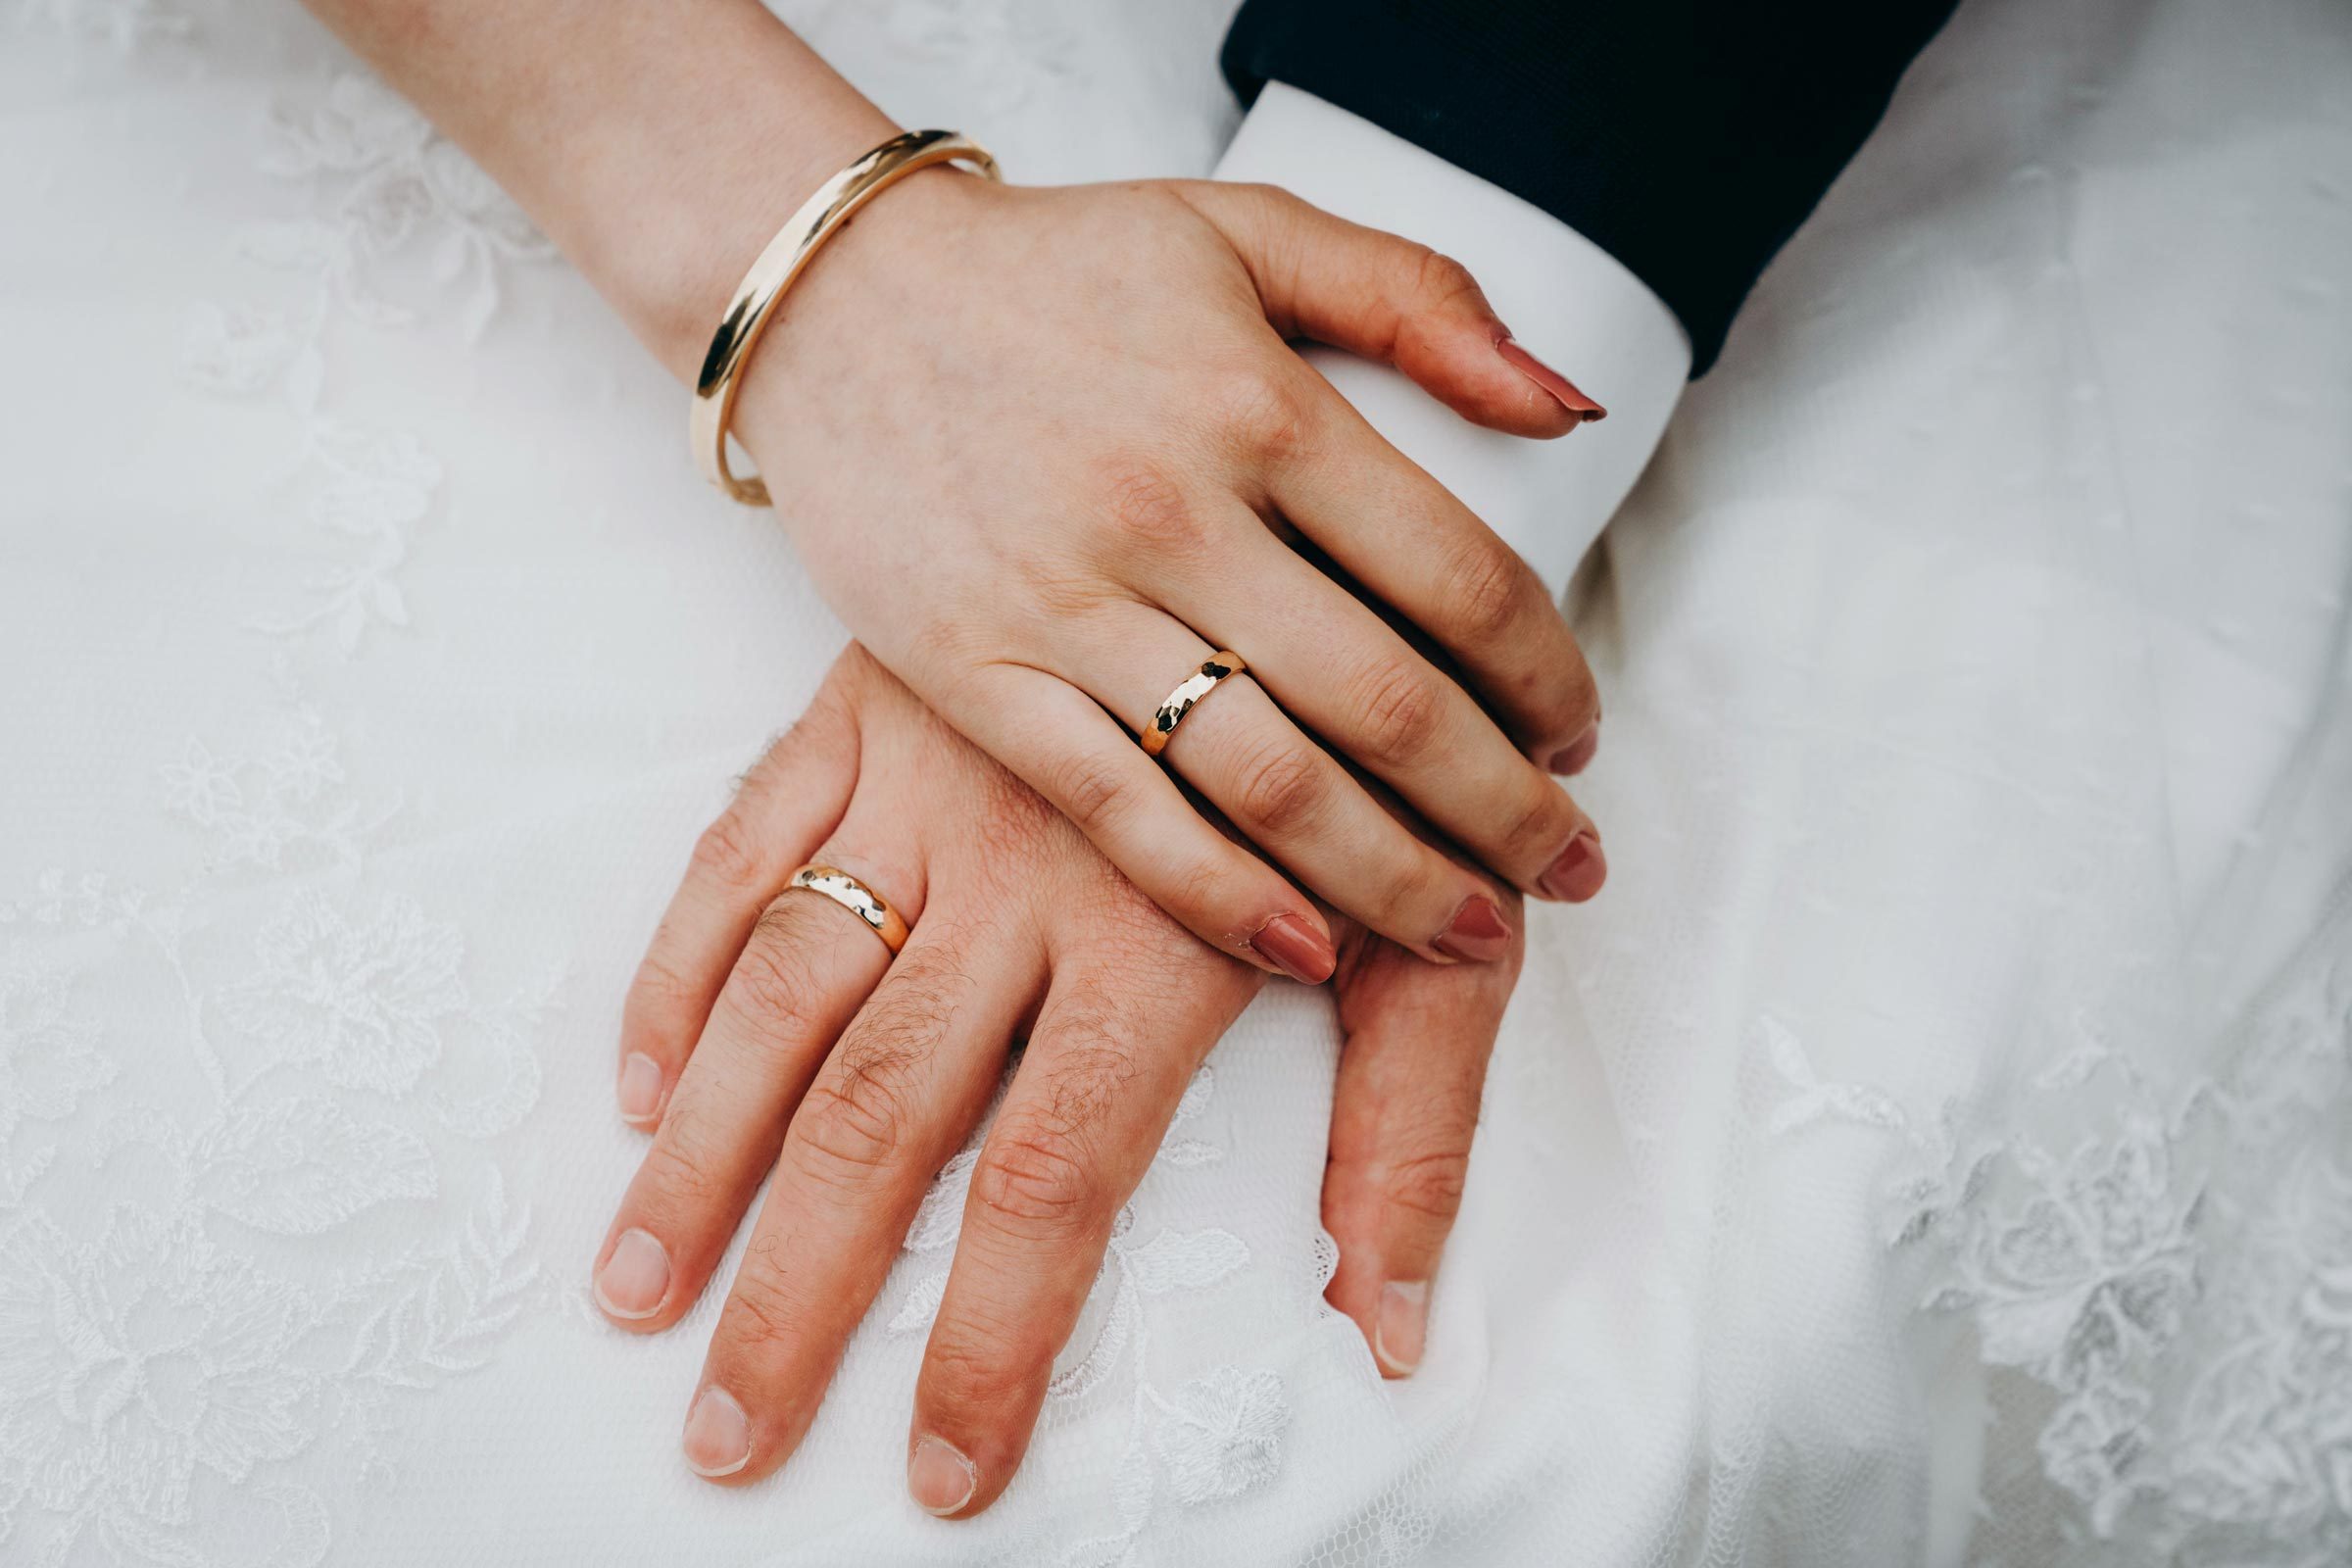 https://www.rd.com/wp-content/uploads/2019/08/couples-hands-with-wedding-rings-GettyImages-1359477117-MLedit.jpg